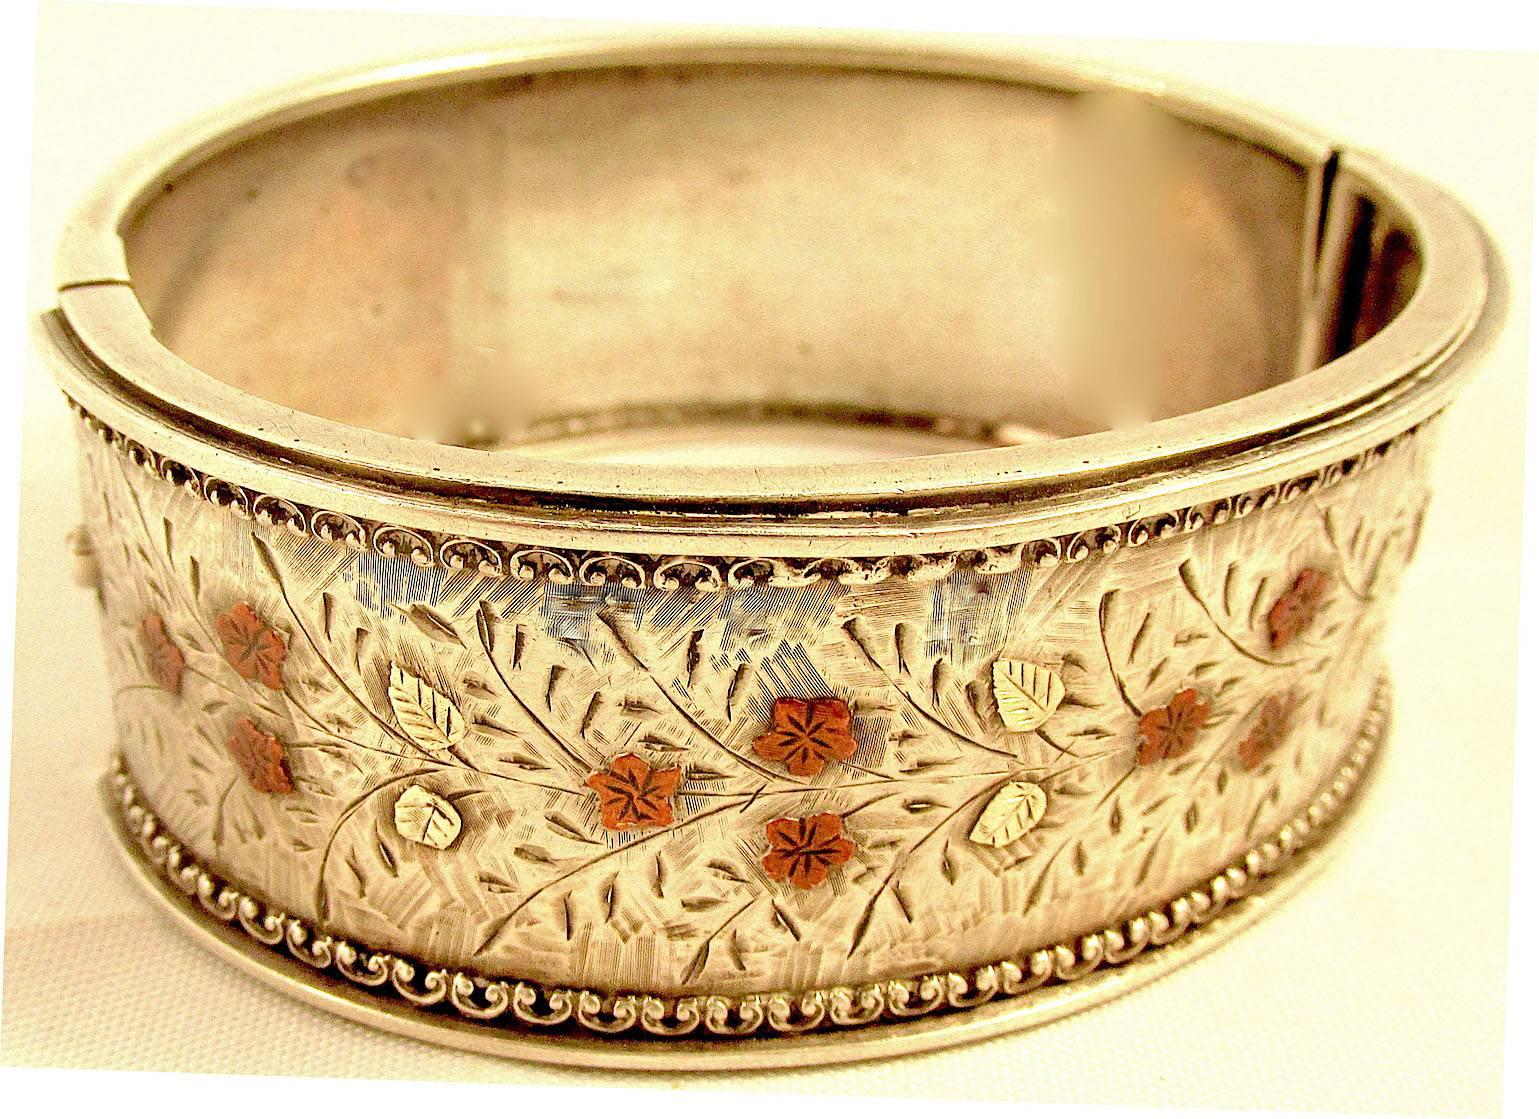 Victorian silver cuff bracelet enhanced with rose gold flowers and yellow gold
leaves. Cuff bracelets were very popular in the Victorian era and this one special due to its added gold figures. The bracelet measures 1